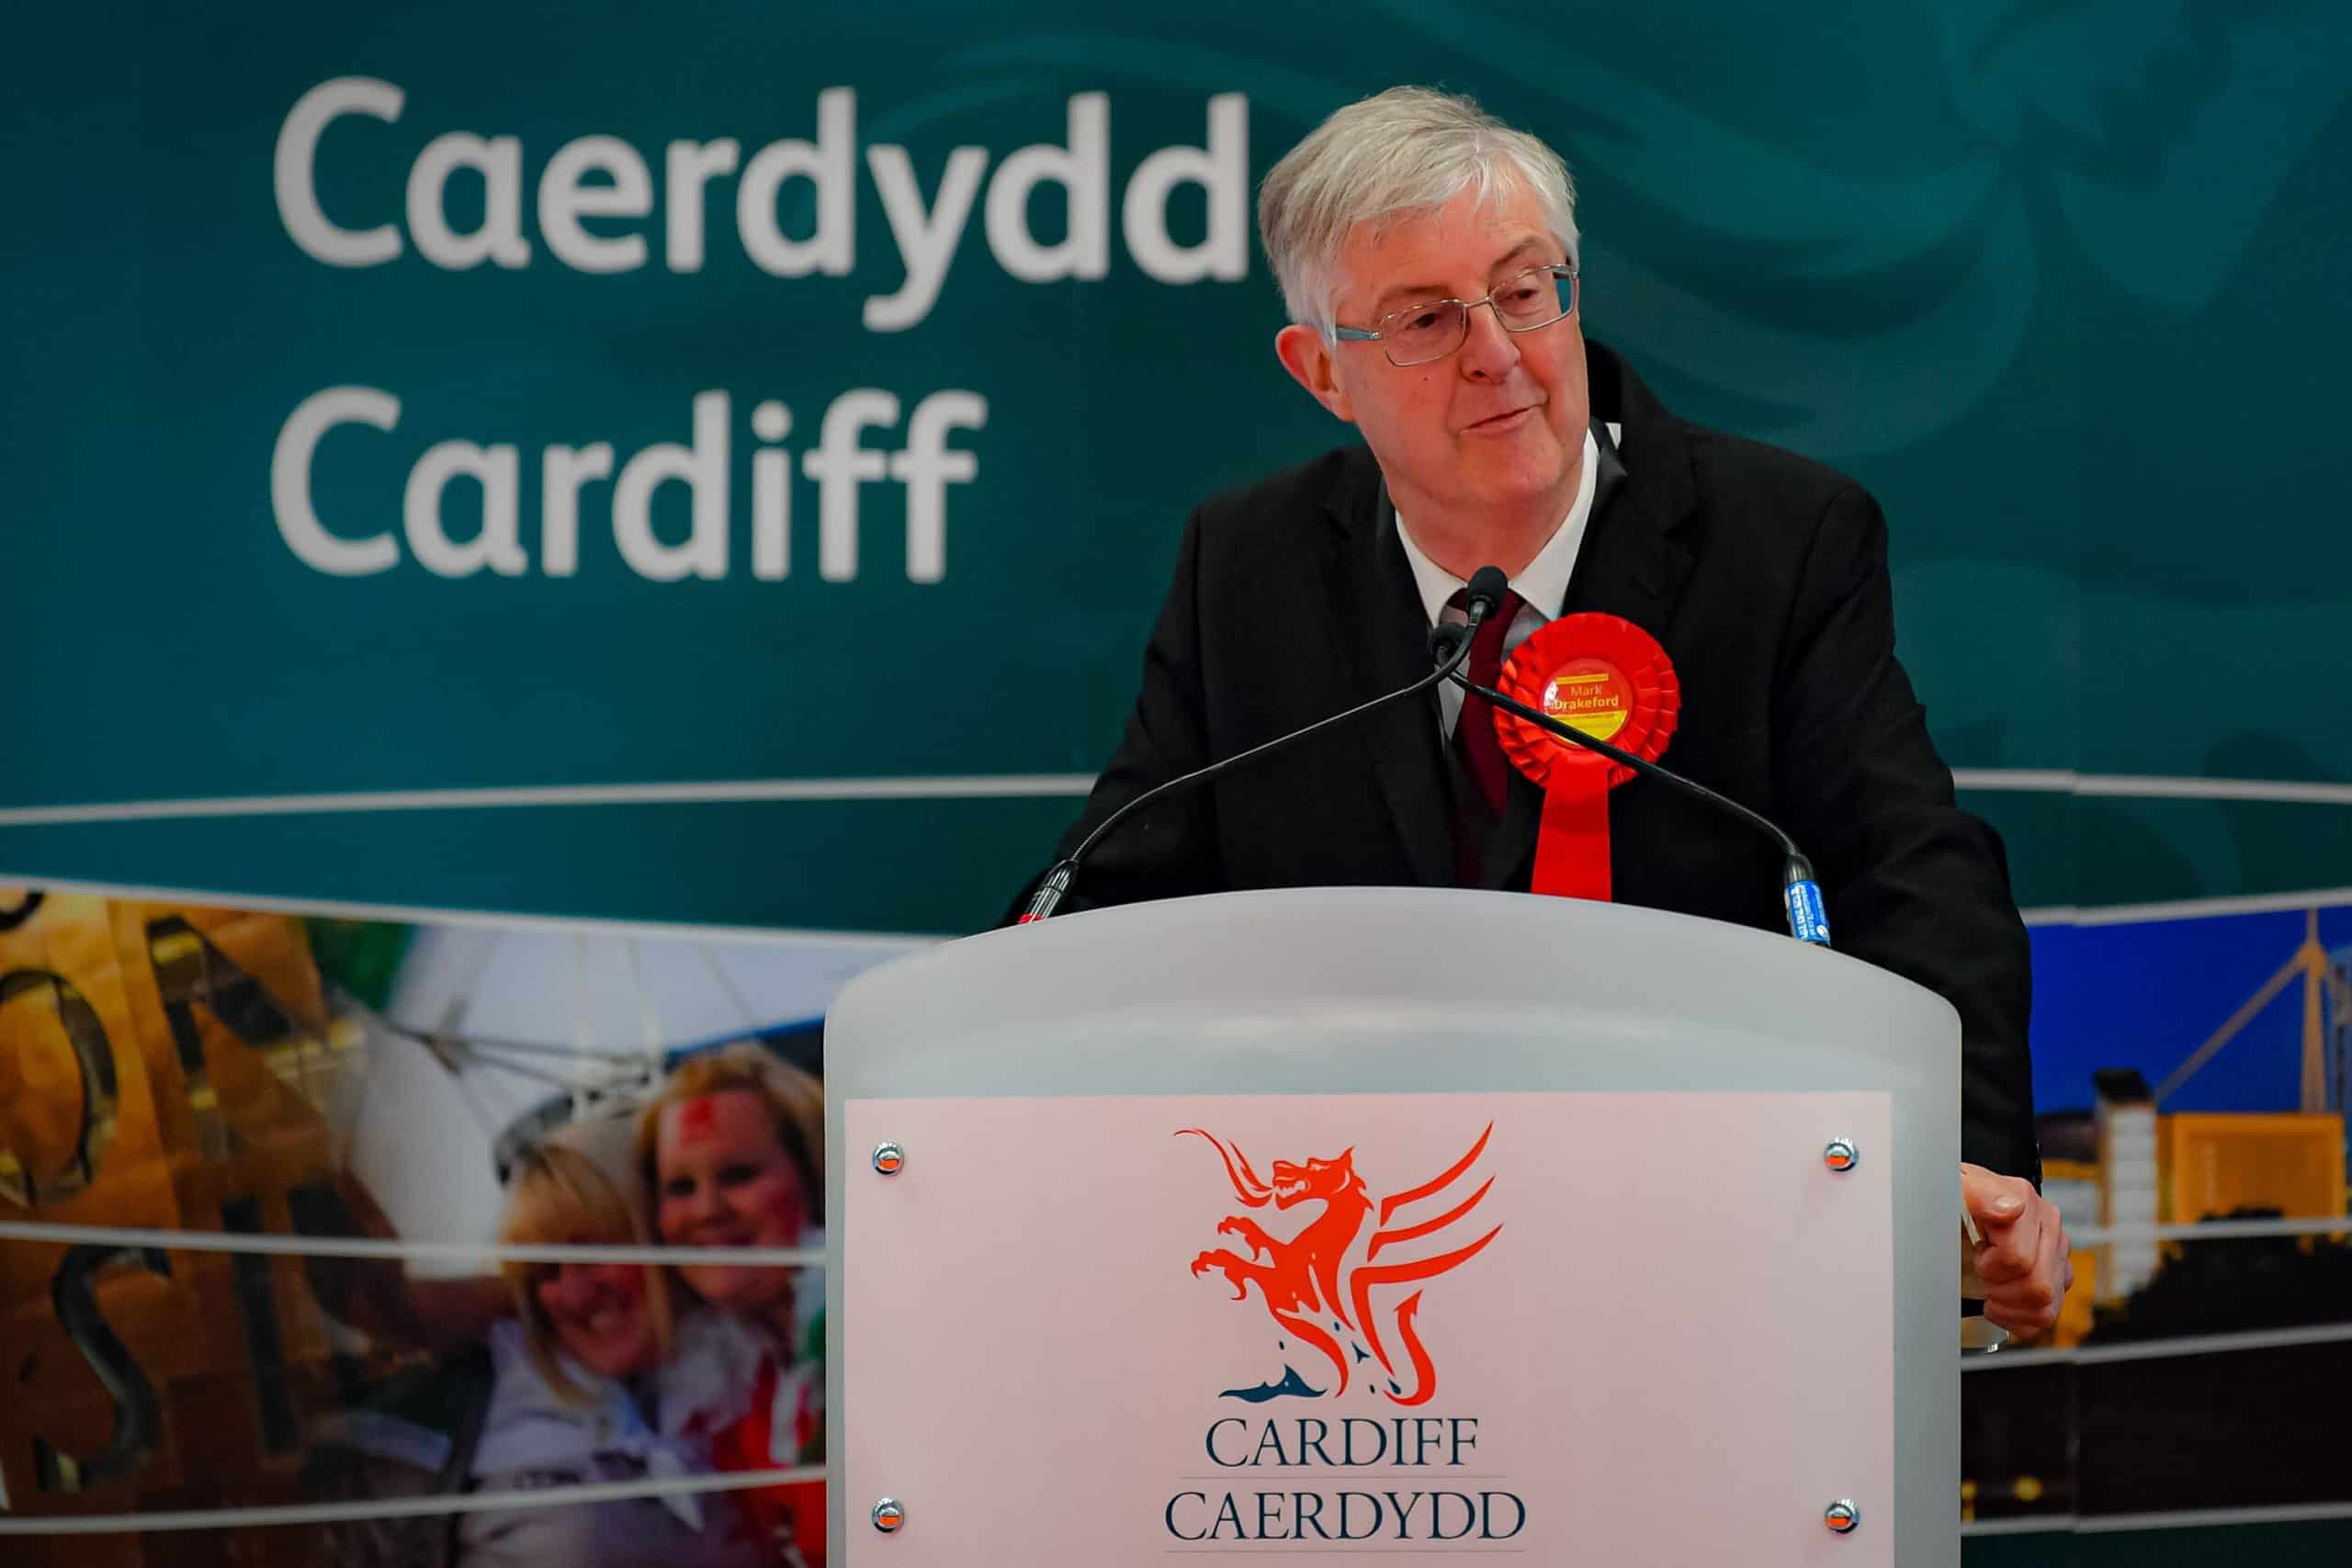 Wales will launch a pilot universal basic income scheme